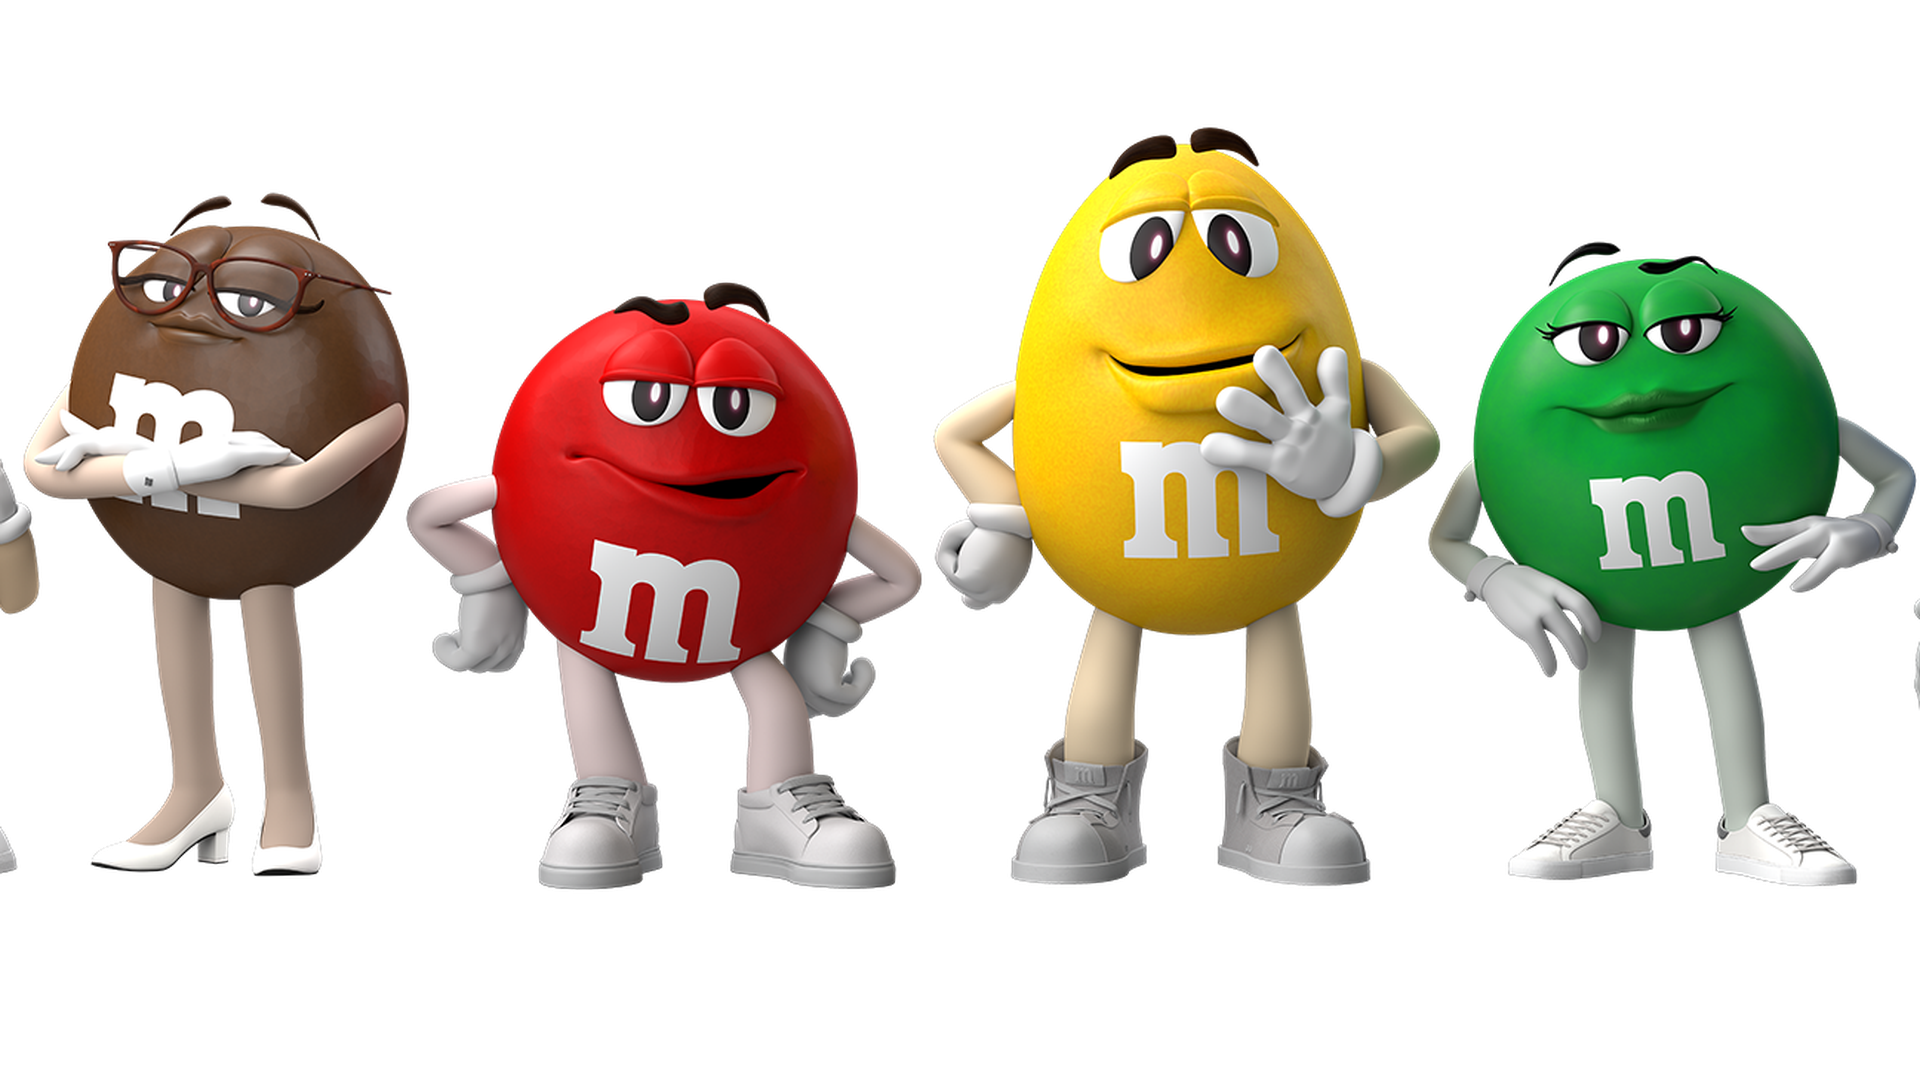 Tweets About The Green M&M's 2022 Redesign